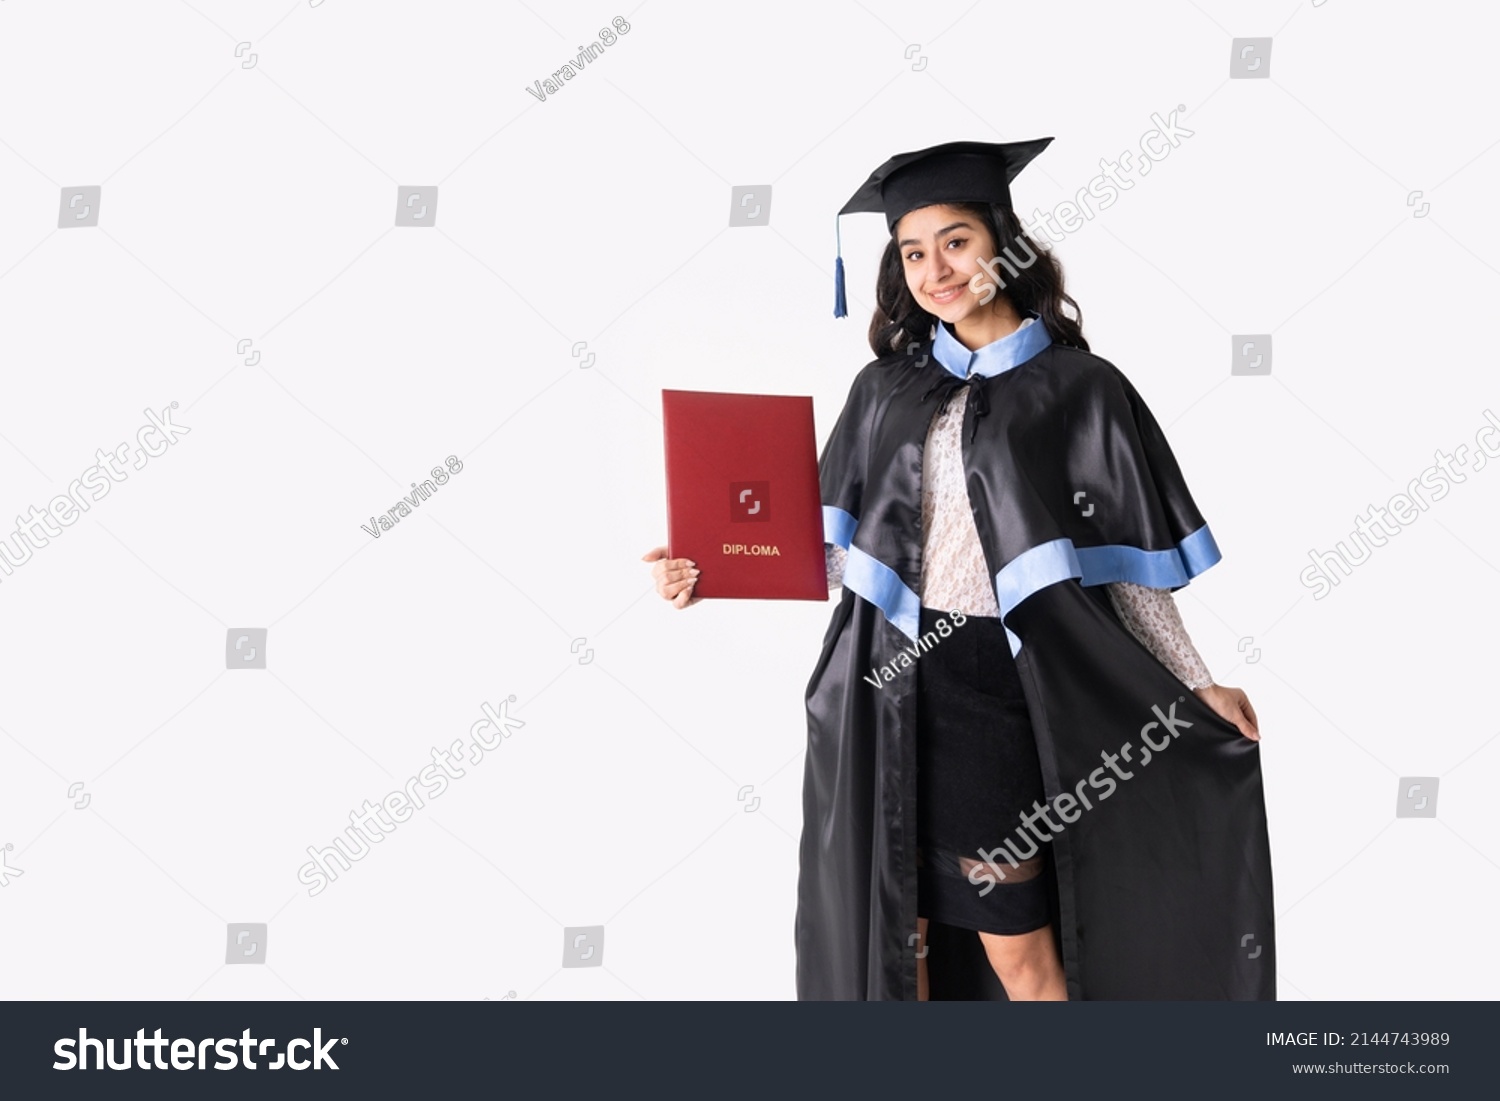 University graduate indian race woman wearing academic regalia and red diploma isolated. #2144743989